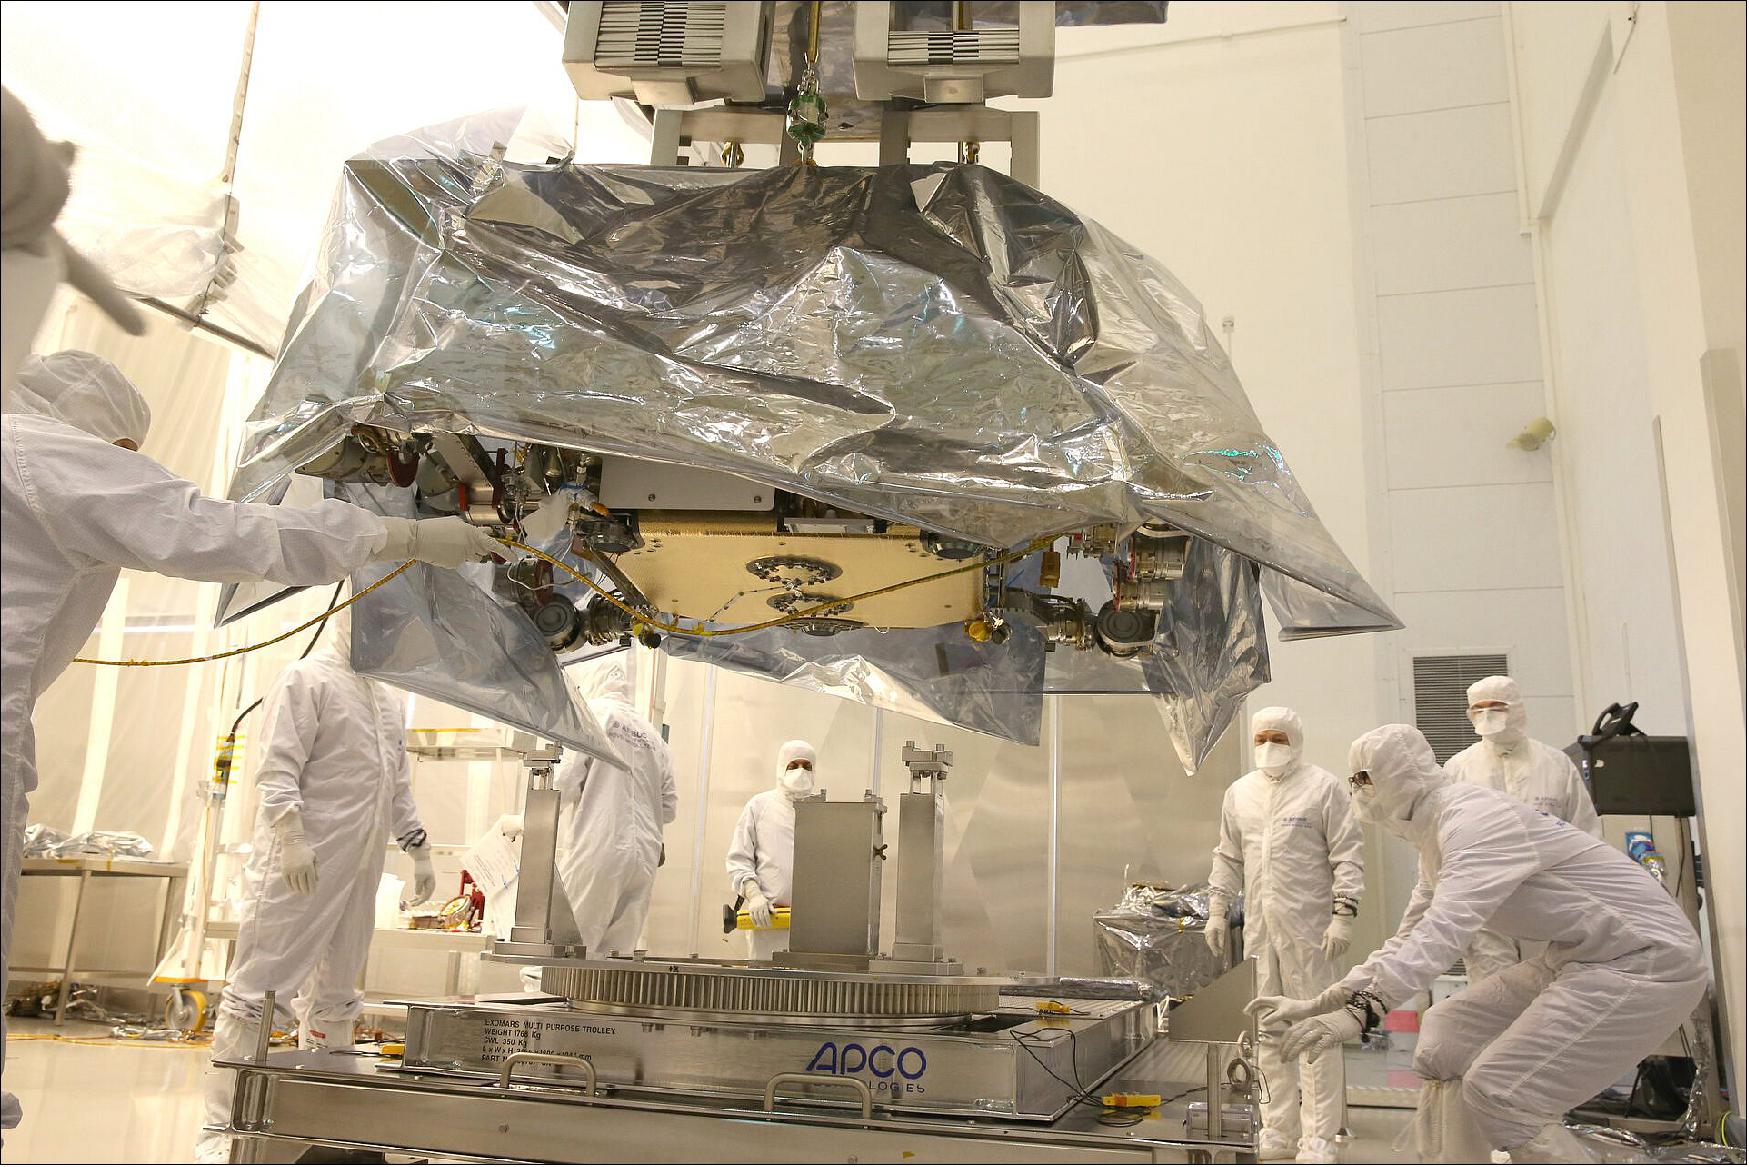 Figure 45: Photo of the Rosalind Franklin ExoMars rover after completing environmental and vacuum testing in Toulouse, France. The rover was tested in a clean room to withstand conditions similar to those on Mars. The vehicle left the Thales Alenia Space facilities in Toulouse on 11 February 2020 en route to Cannes, where it will be integrated with the carrier and descent modules, and it will undergo months of intense testing to confirm it is compatible with the mission operations and the martian environment (image credit: Airbus)